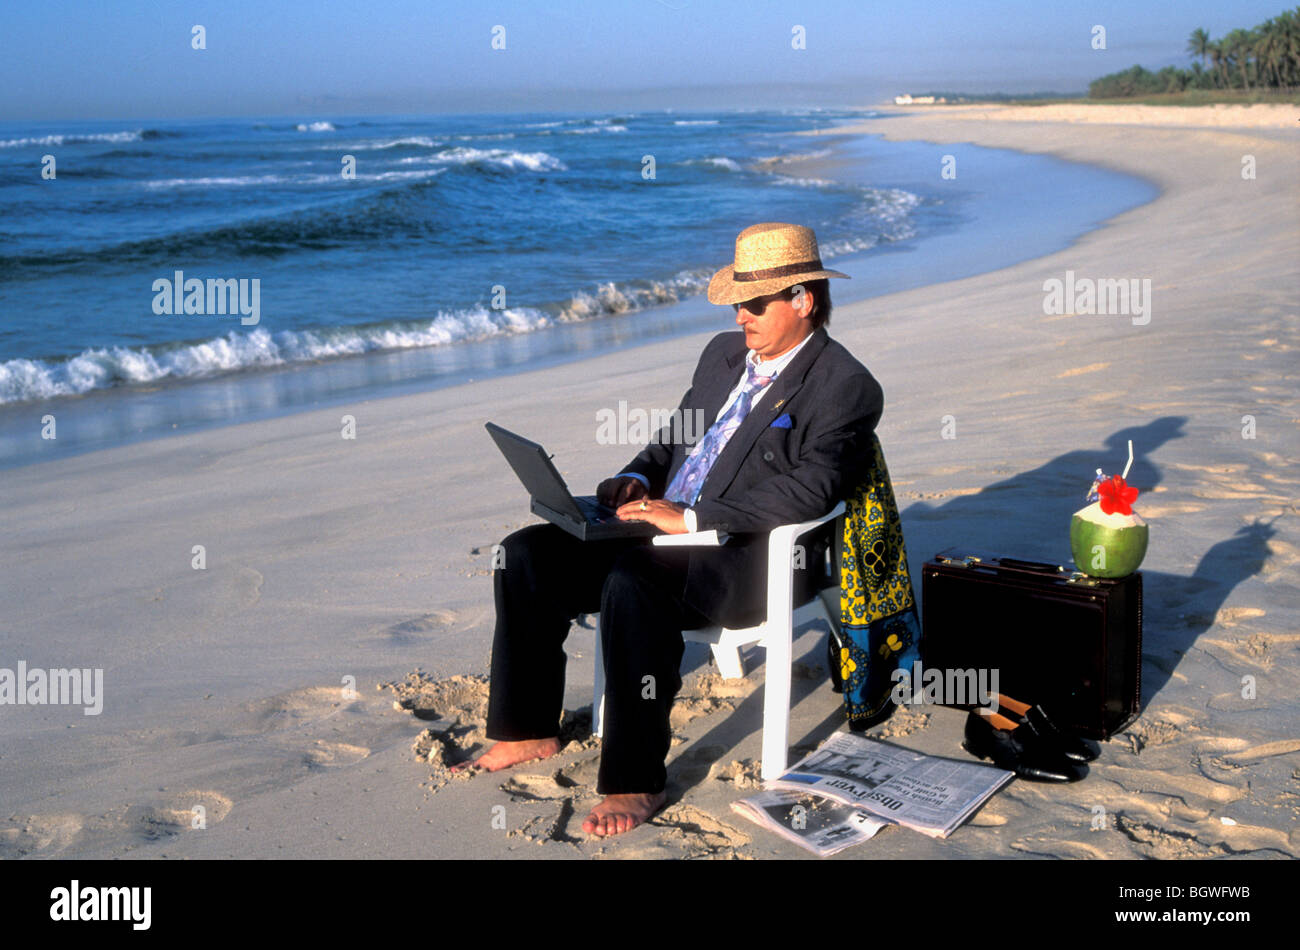 Business traveller seated on the beach and using a laptop in Salalah, Dhofar Oman Stock Photo